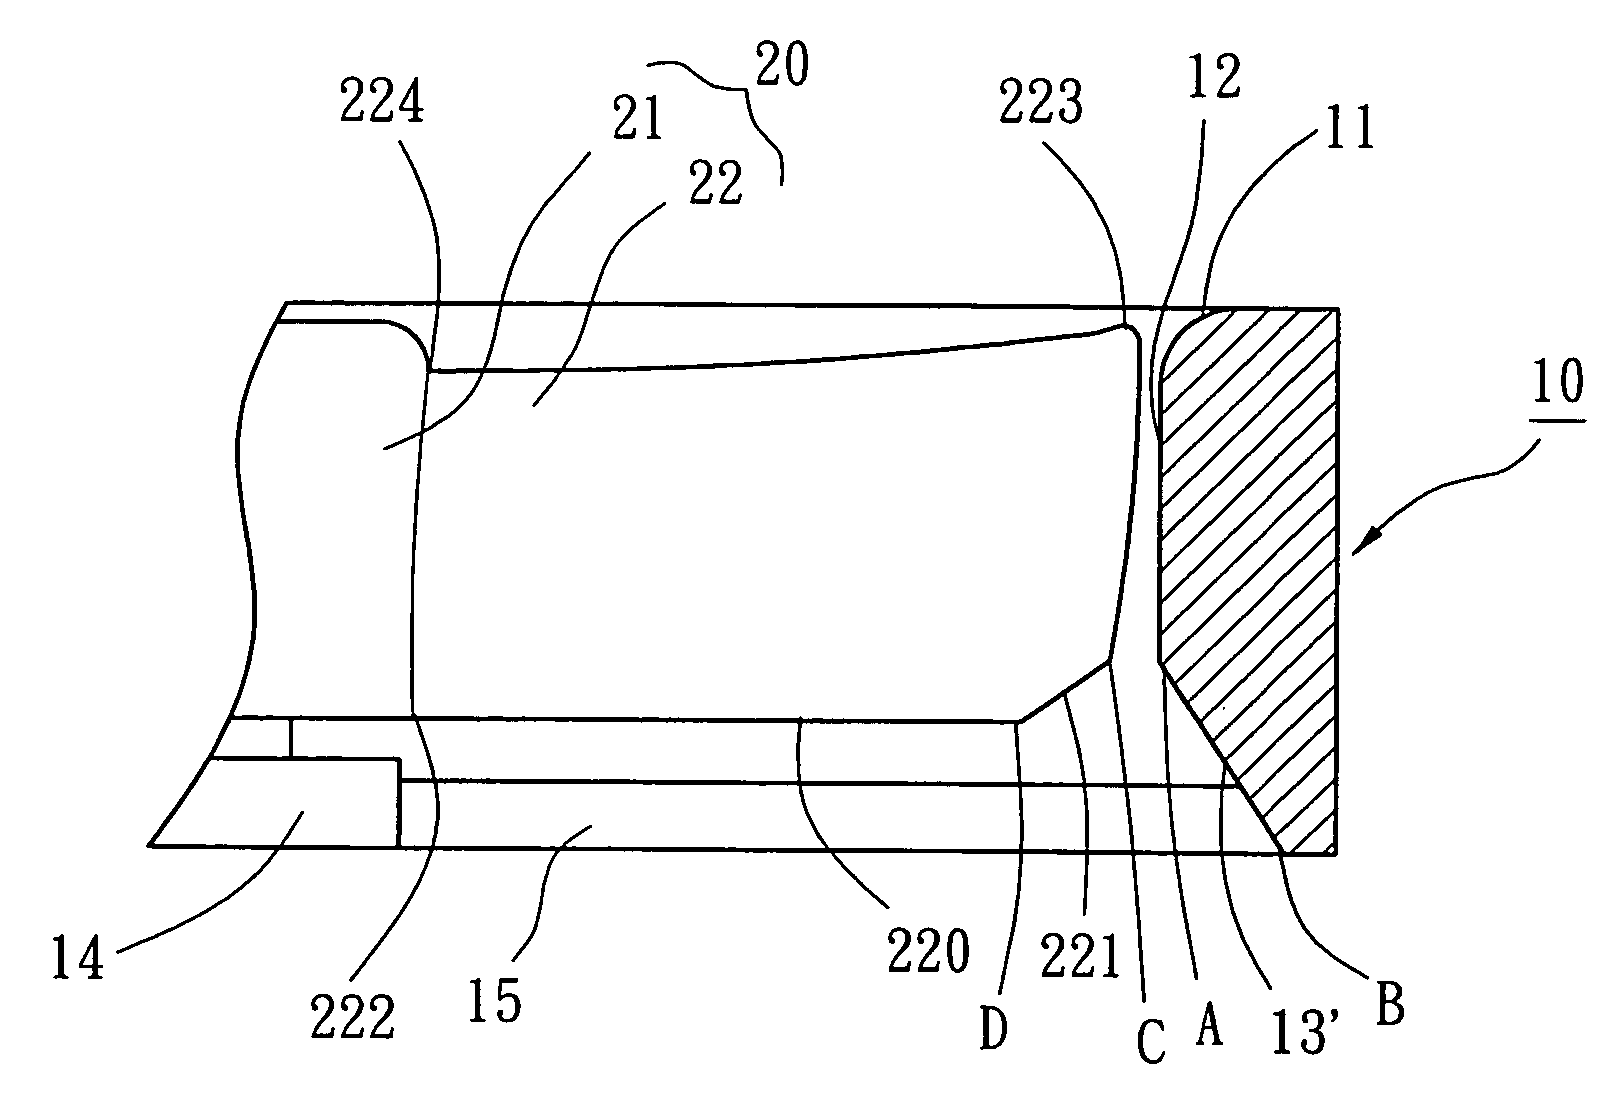 Axial-flow type fan having an air outlet blade structure